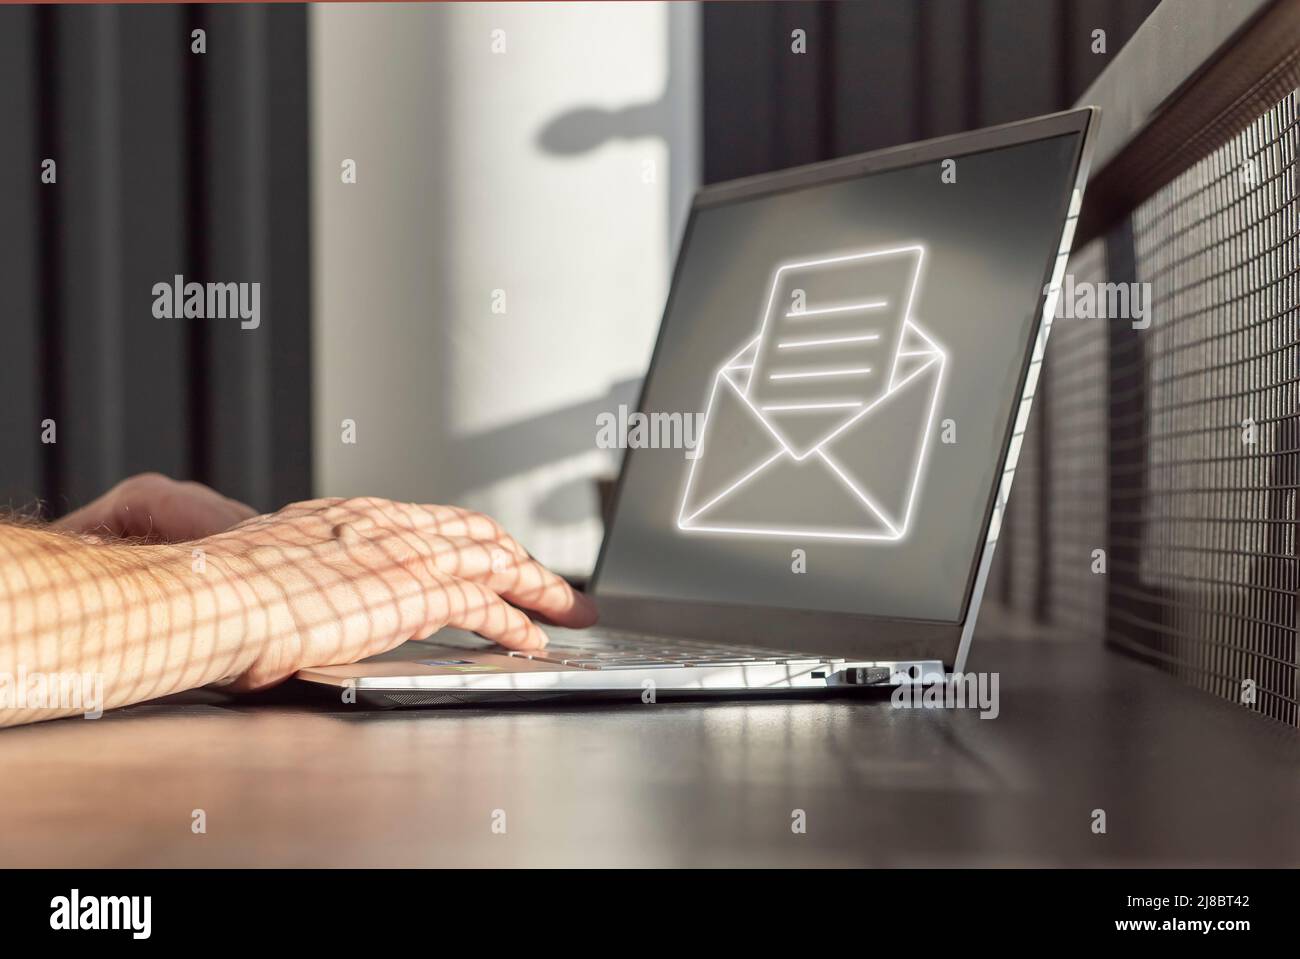 Spam email. Man receiving junk mail, unwanted messages, ads for money scams while working on laptop. Hands on keyboard closeup. High quality photo Stock Photo